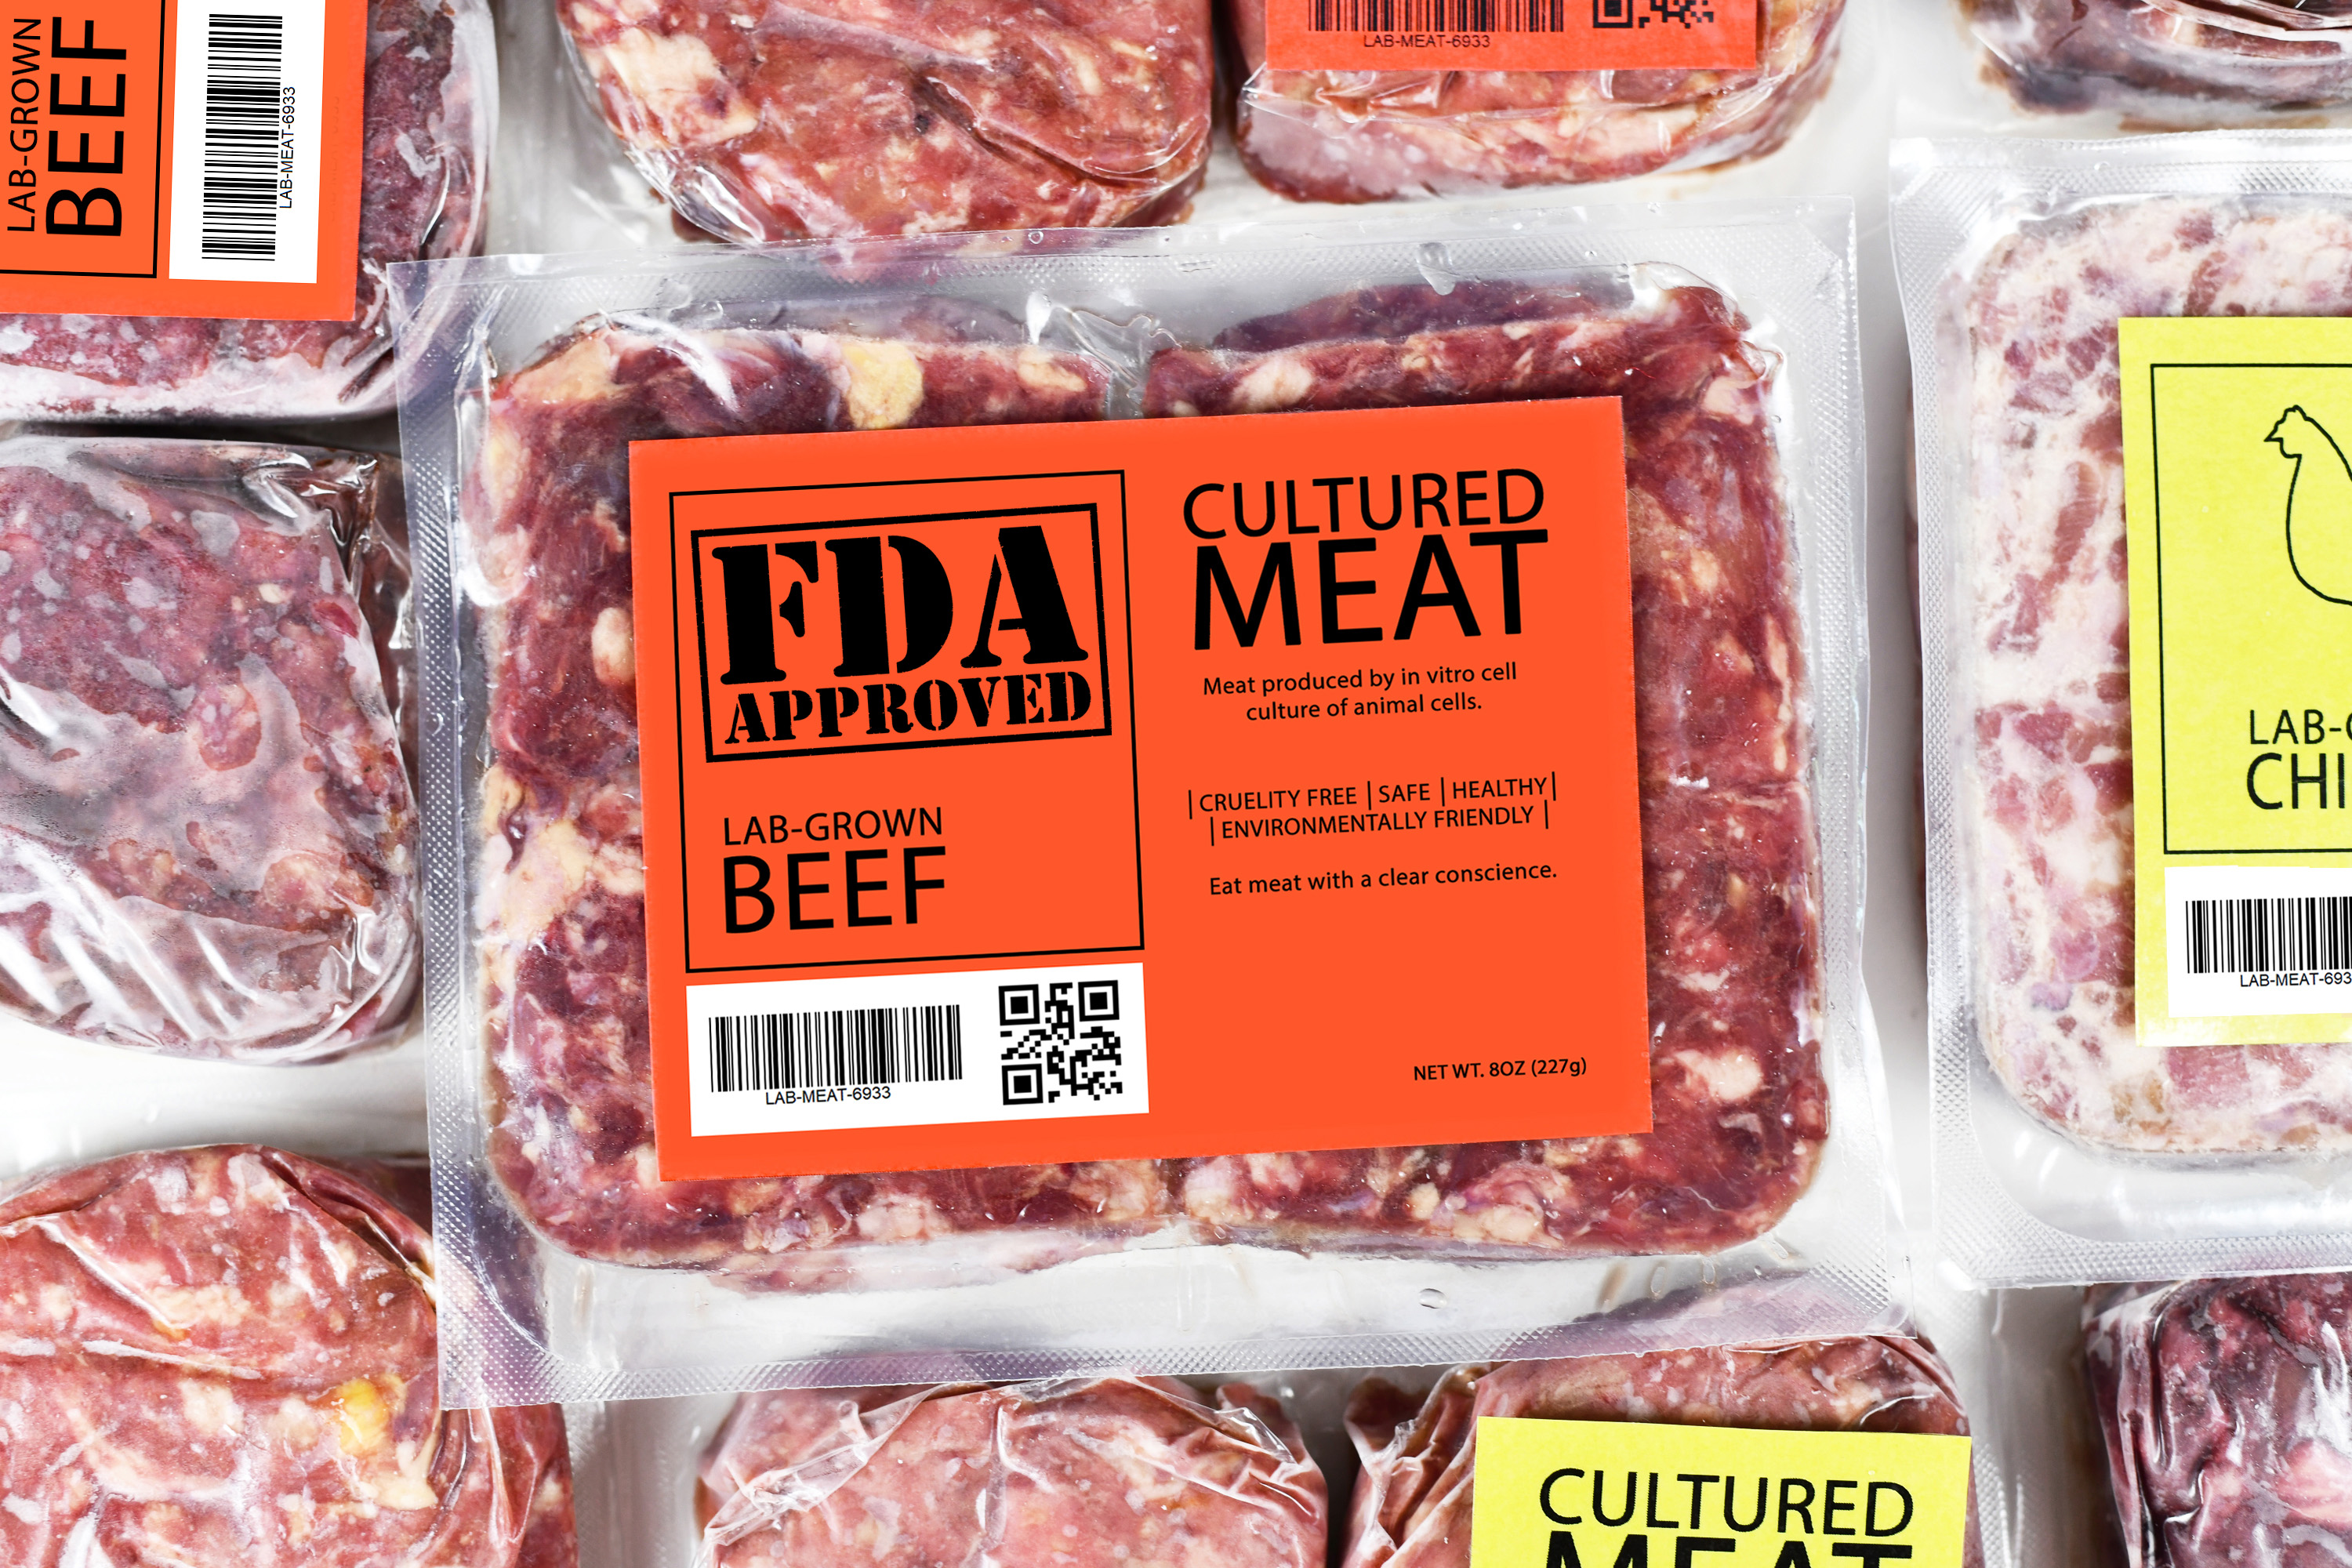 Lab Grown Meat Gets Green Light From FDA For Sale To U.S. Consumers